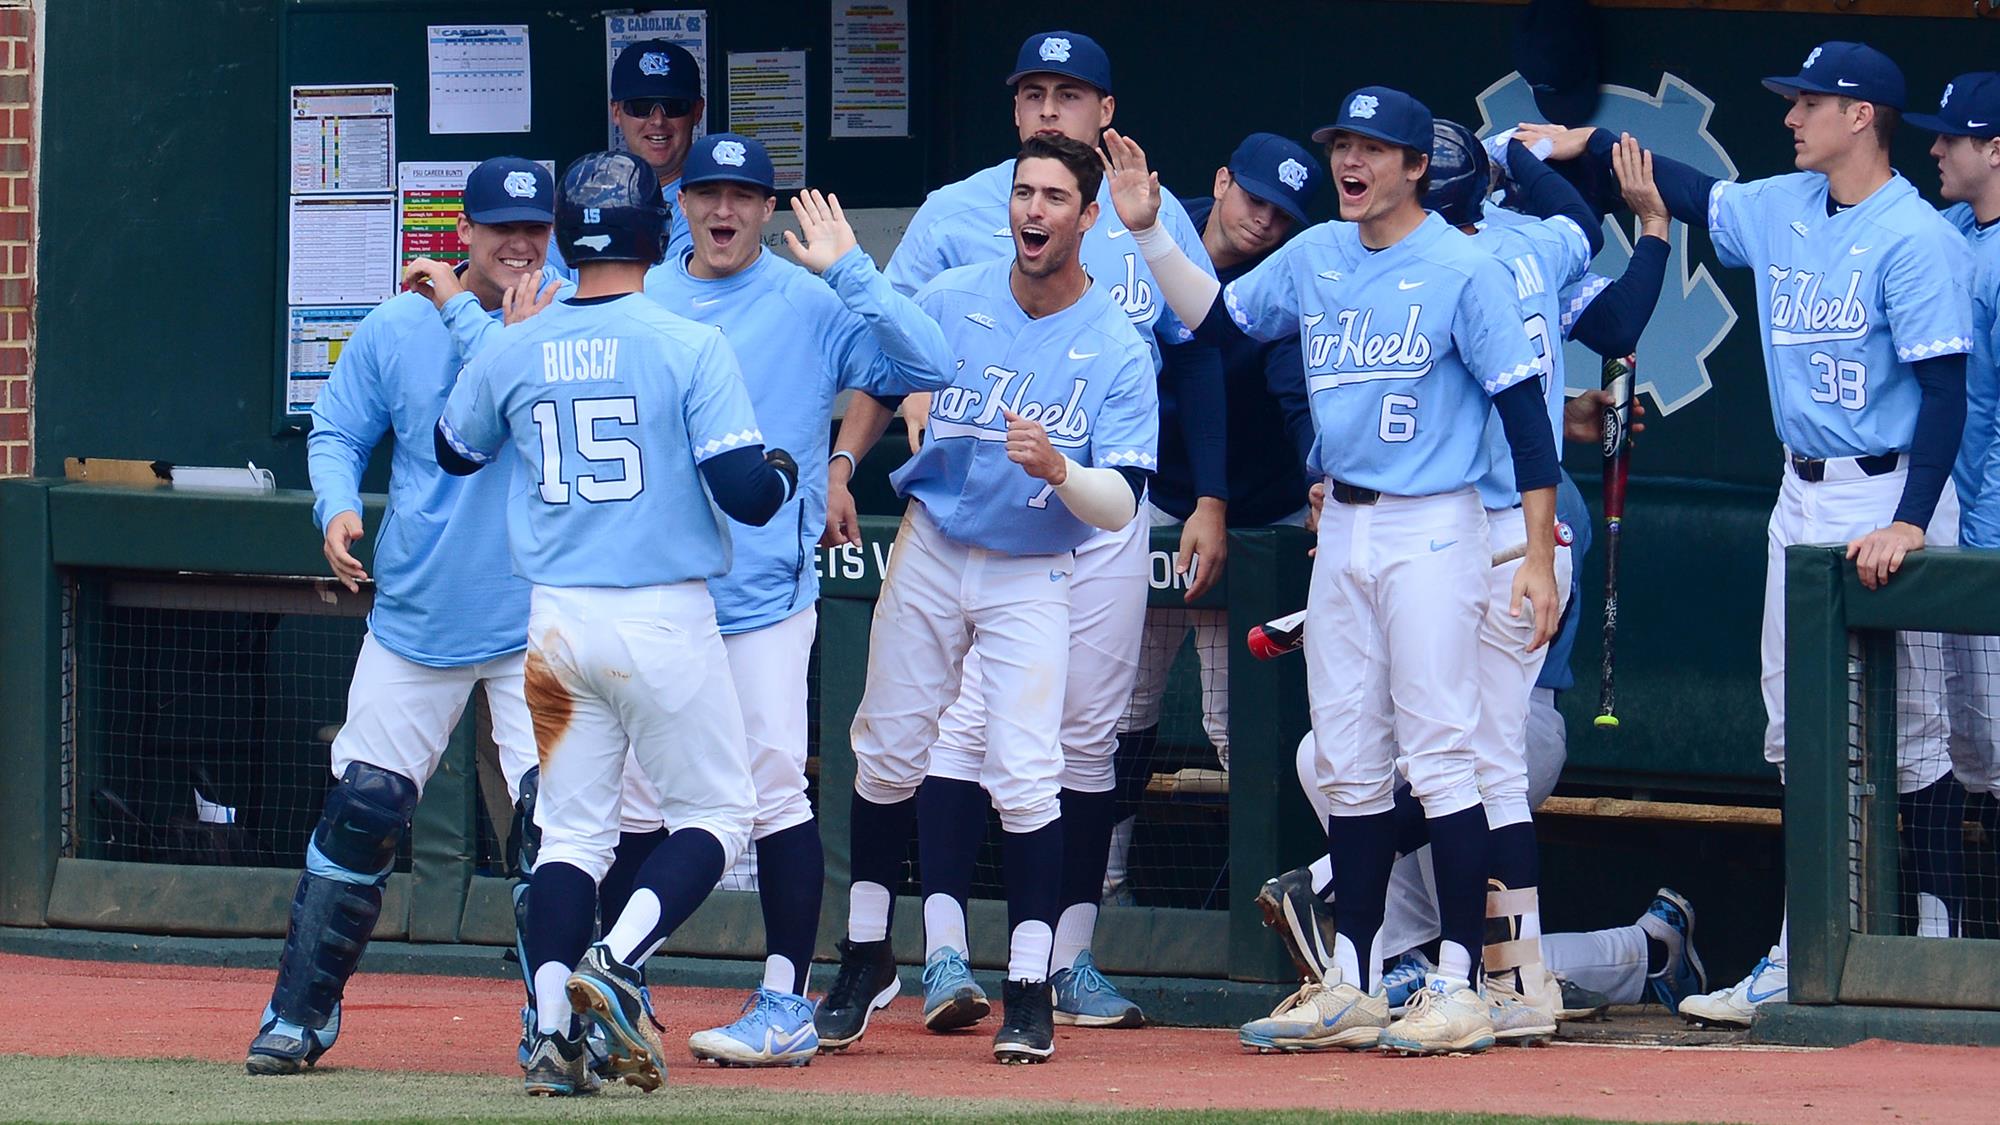 Brandon Riley's 15th-Inning Walk-Off Single Gets UNC Past Wake Forest in  Friday's Series Opener 